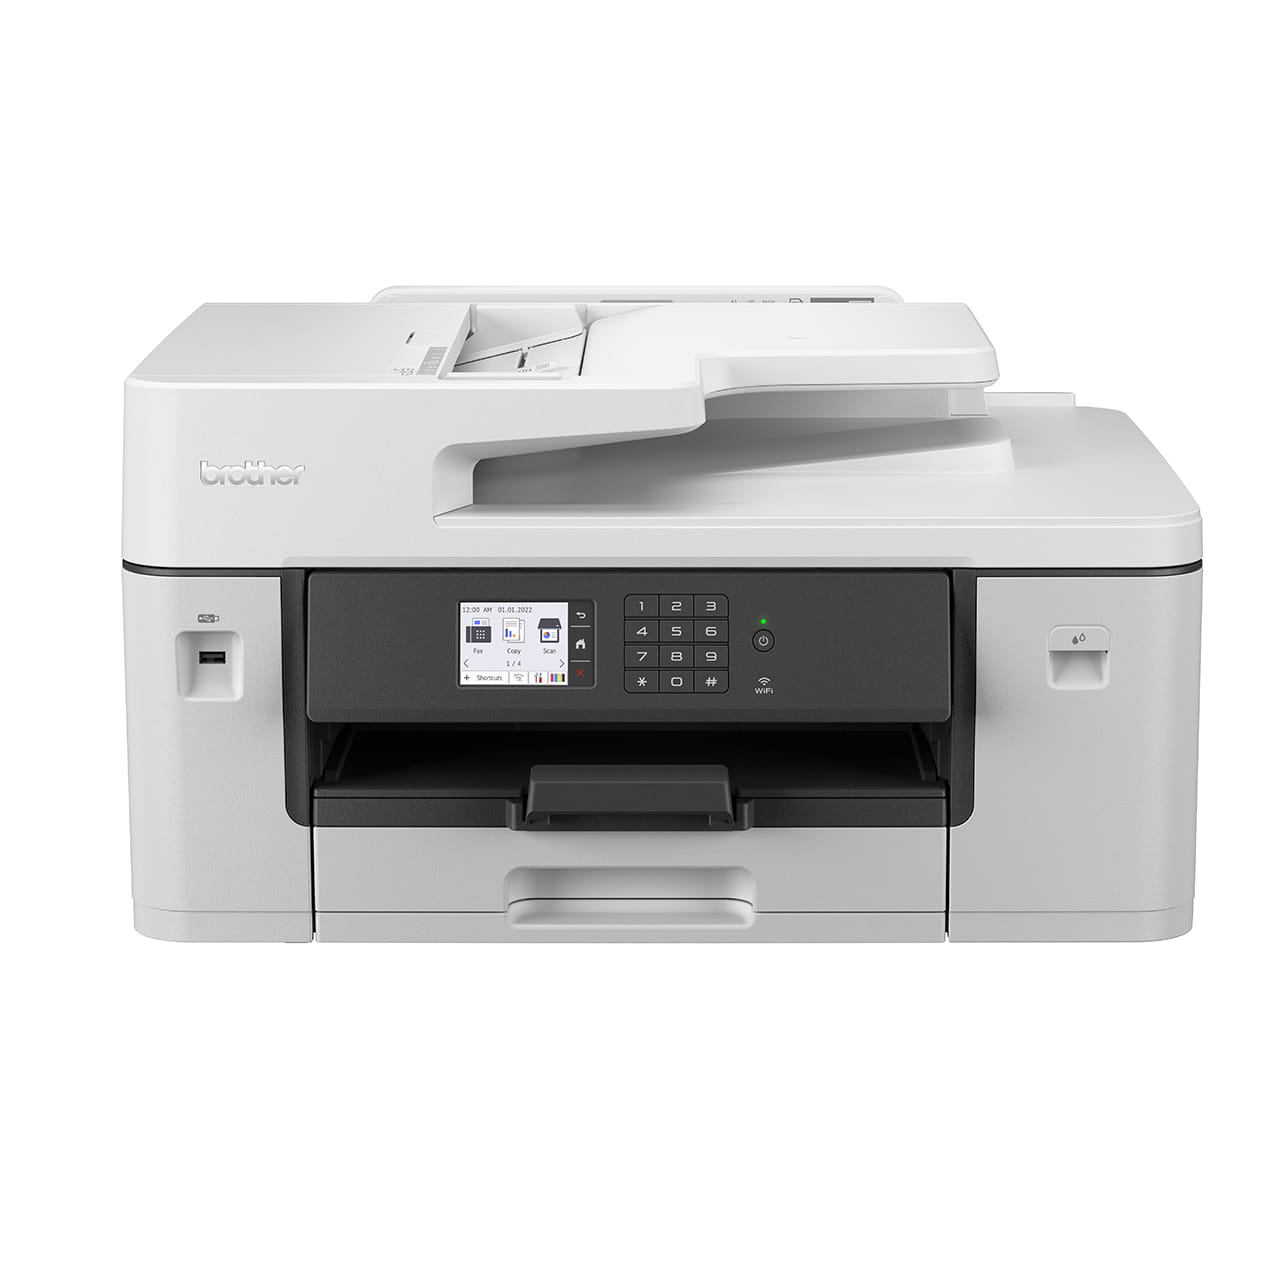 Brother MFC-J3540DW Inkjet Printer Front View